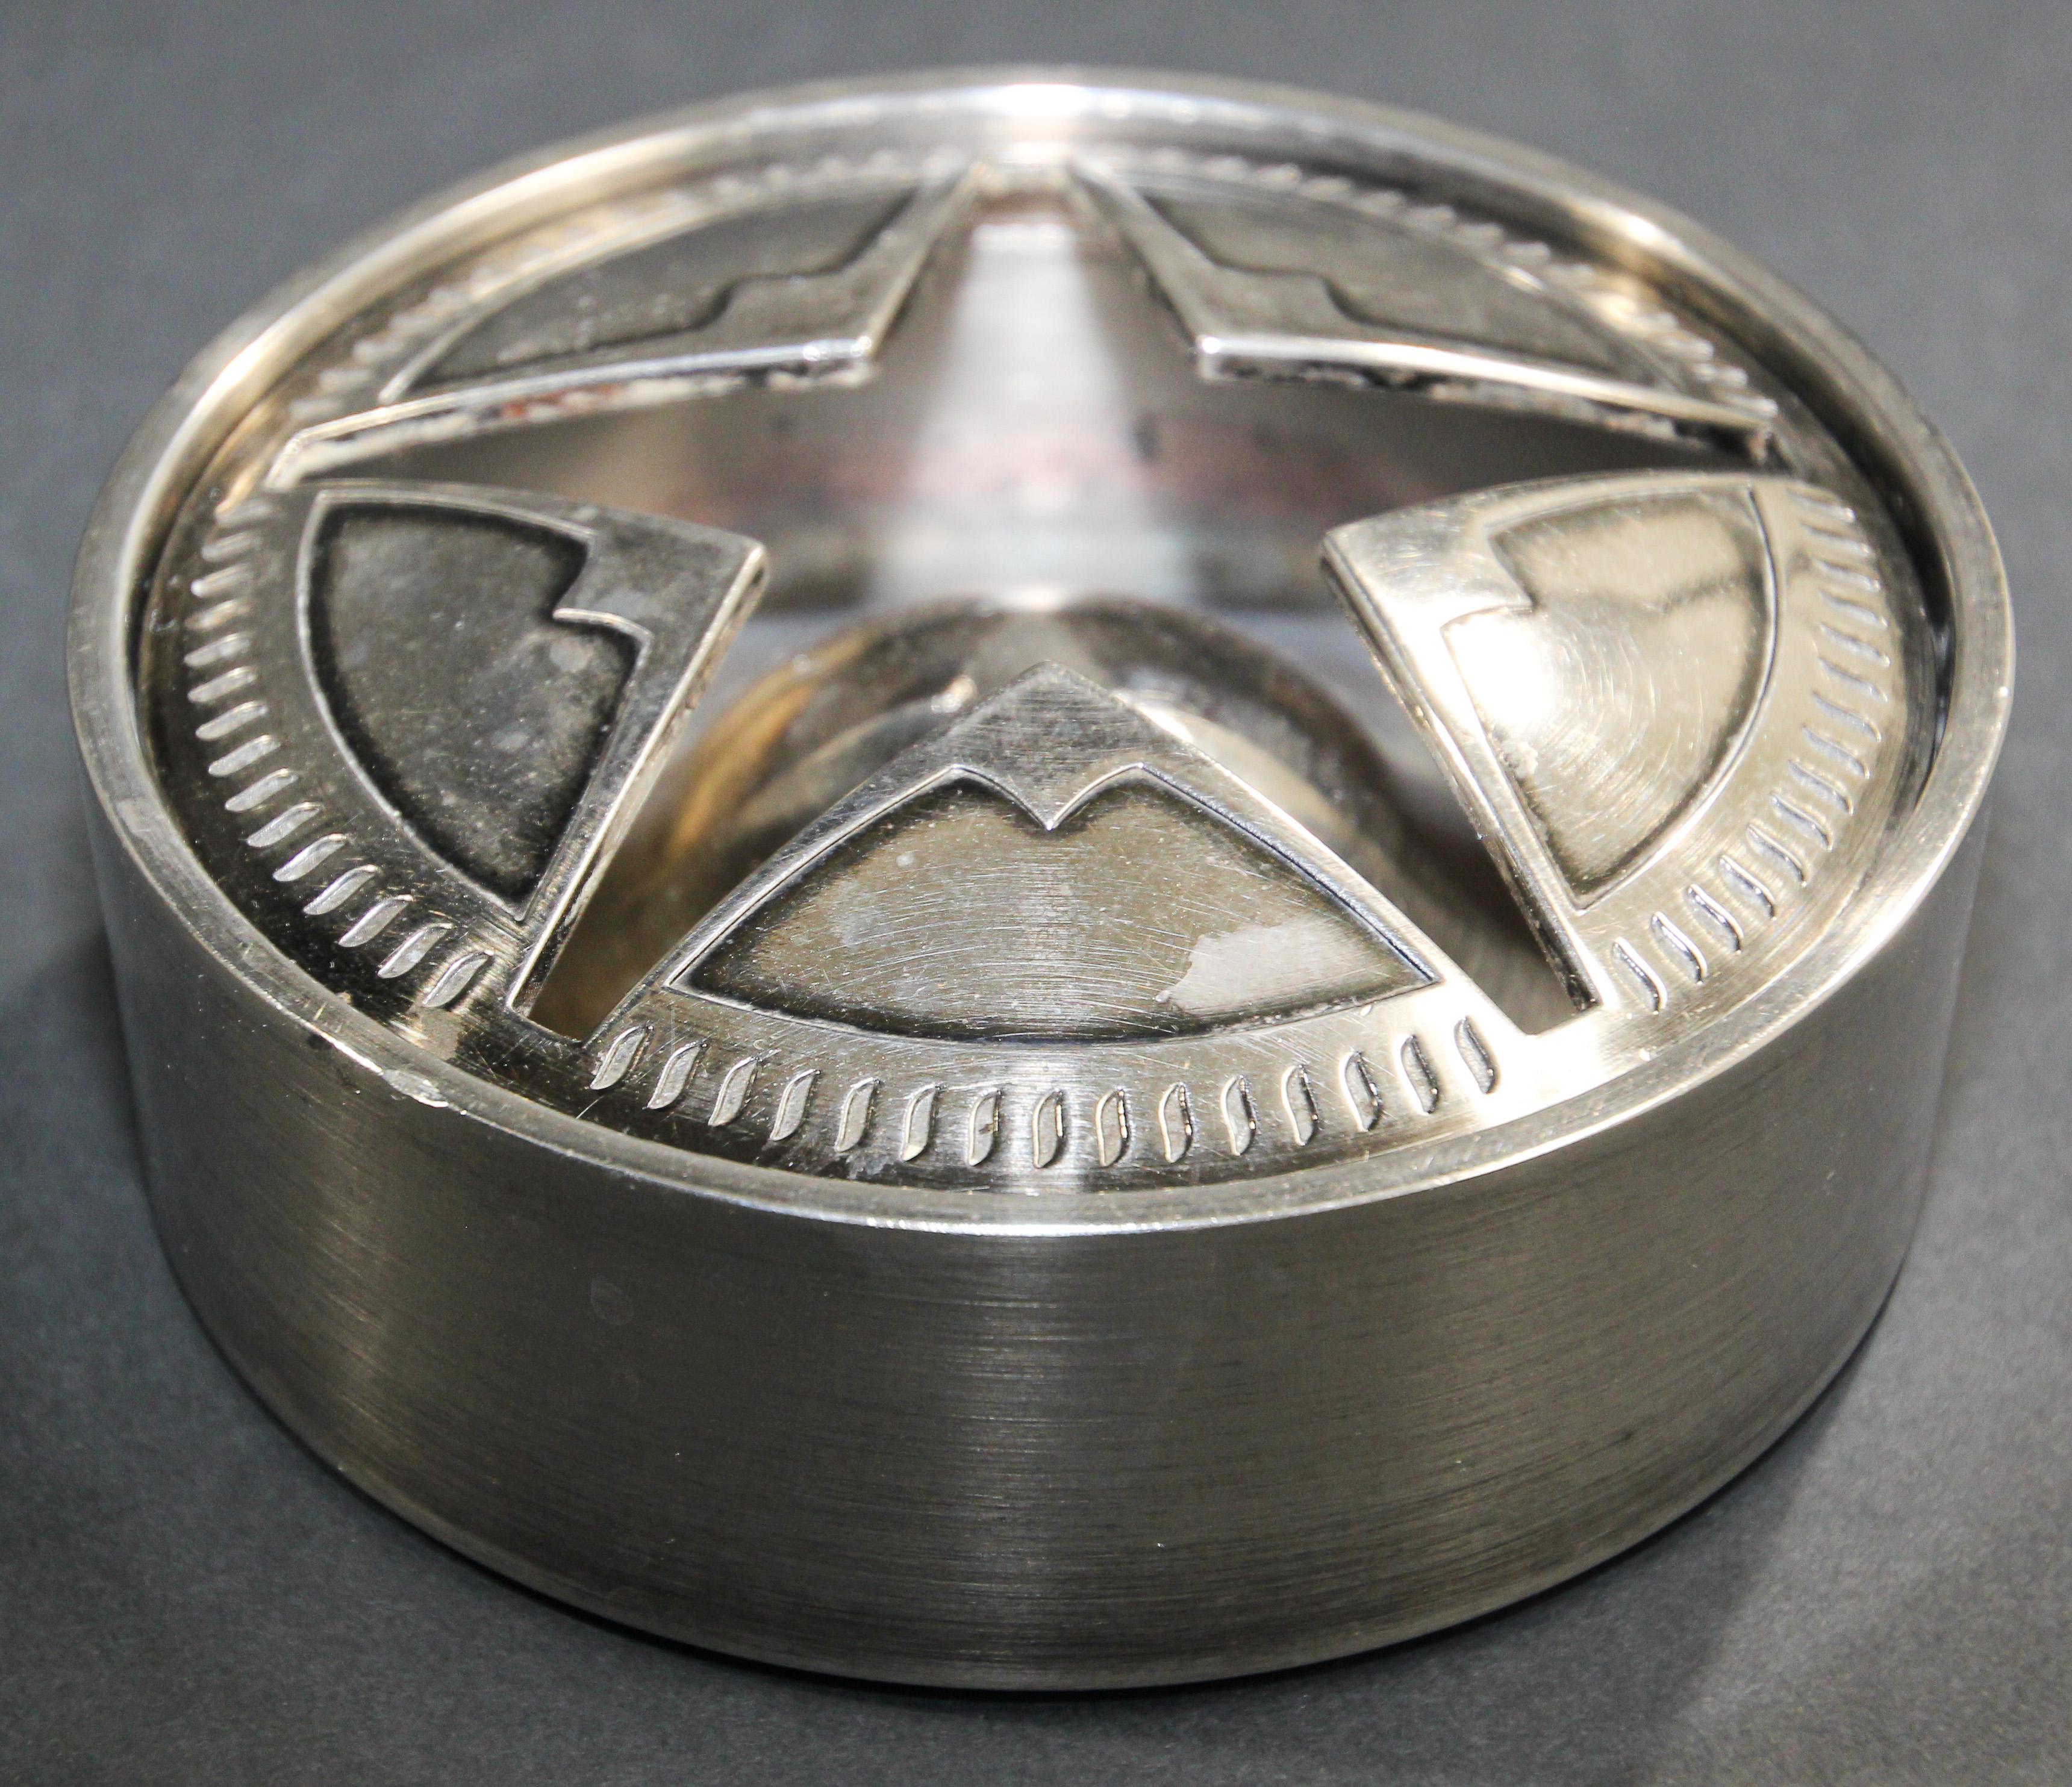 Vintage limited edition Marlboro Star round brushed metal stainless steel ashtray.
Vintage Marlboro ashtray - Texas Star Marlboro, windproof ashtray with lid, star cut out on top lid.
Collectible vintage Marlboro Lone Star Texas ashtray, it has a